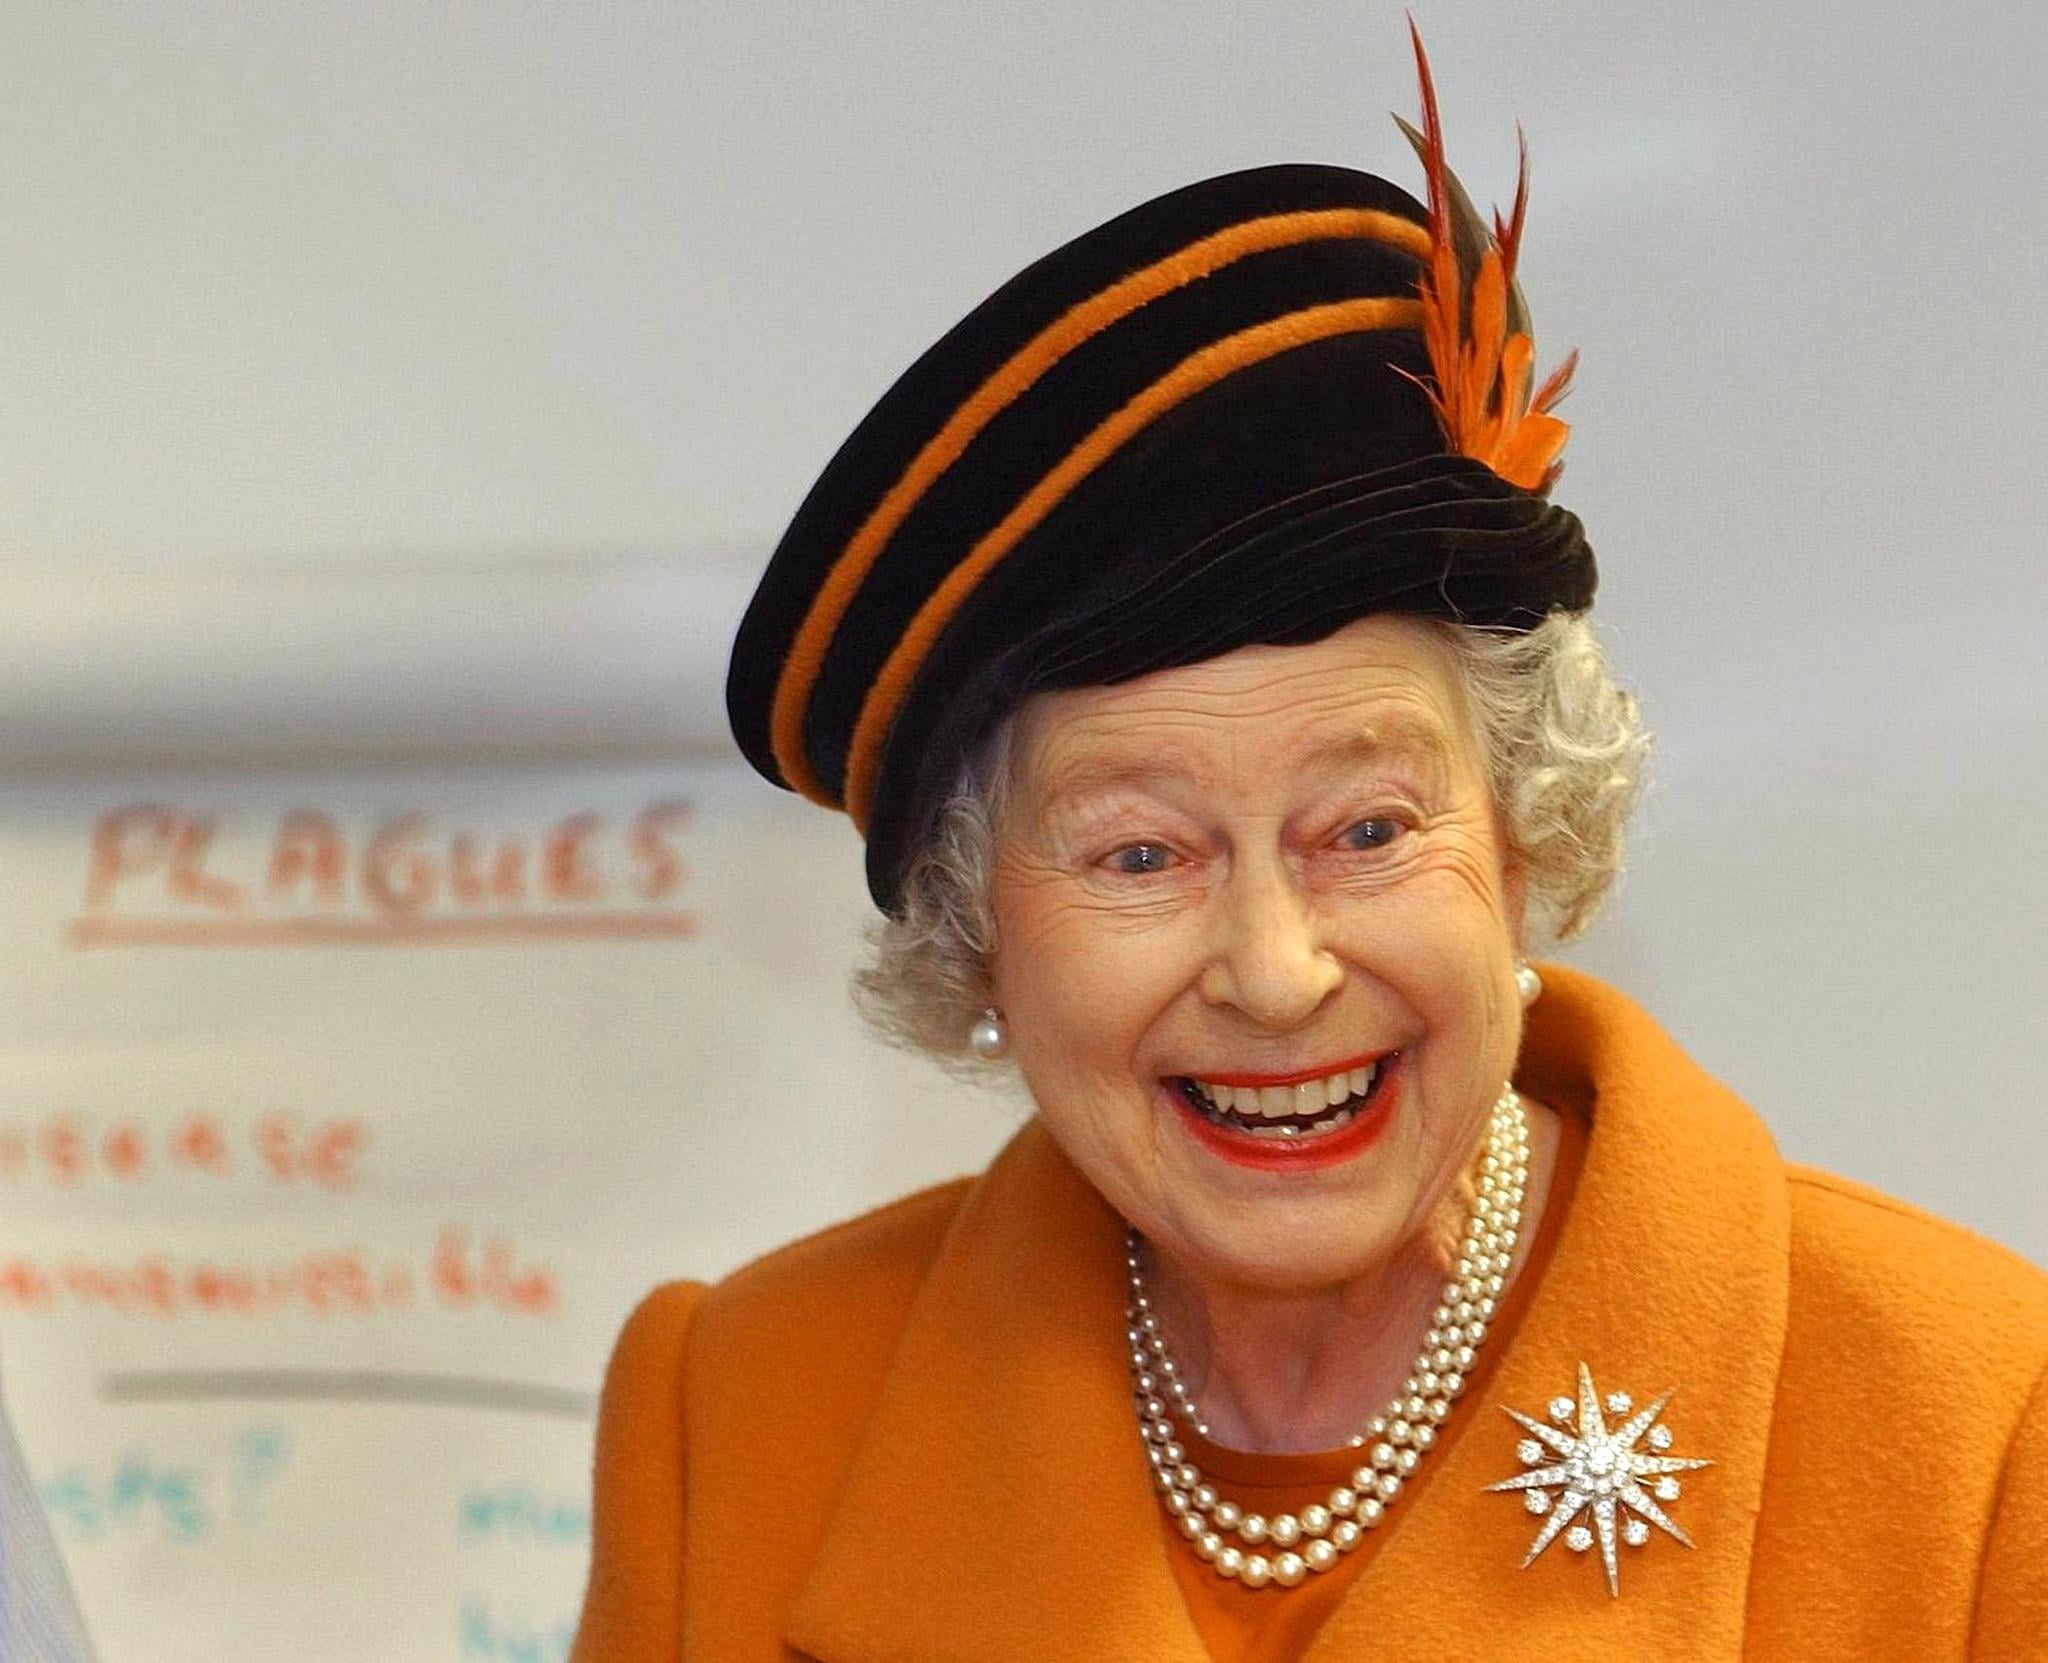 Queen Elizabeth II at a visit to The Royal Veterinary College in 2003